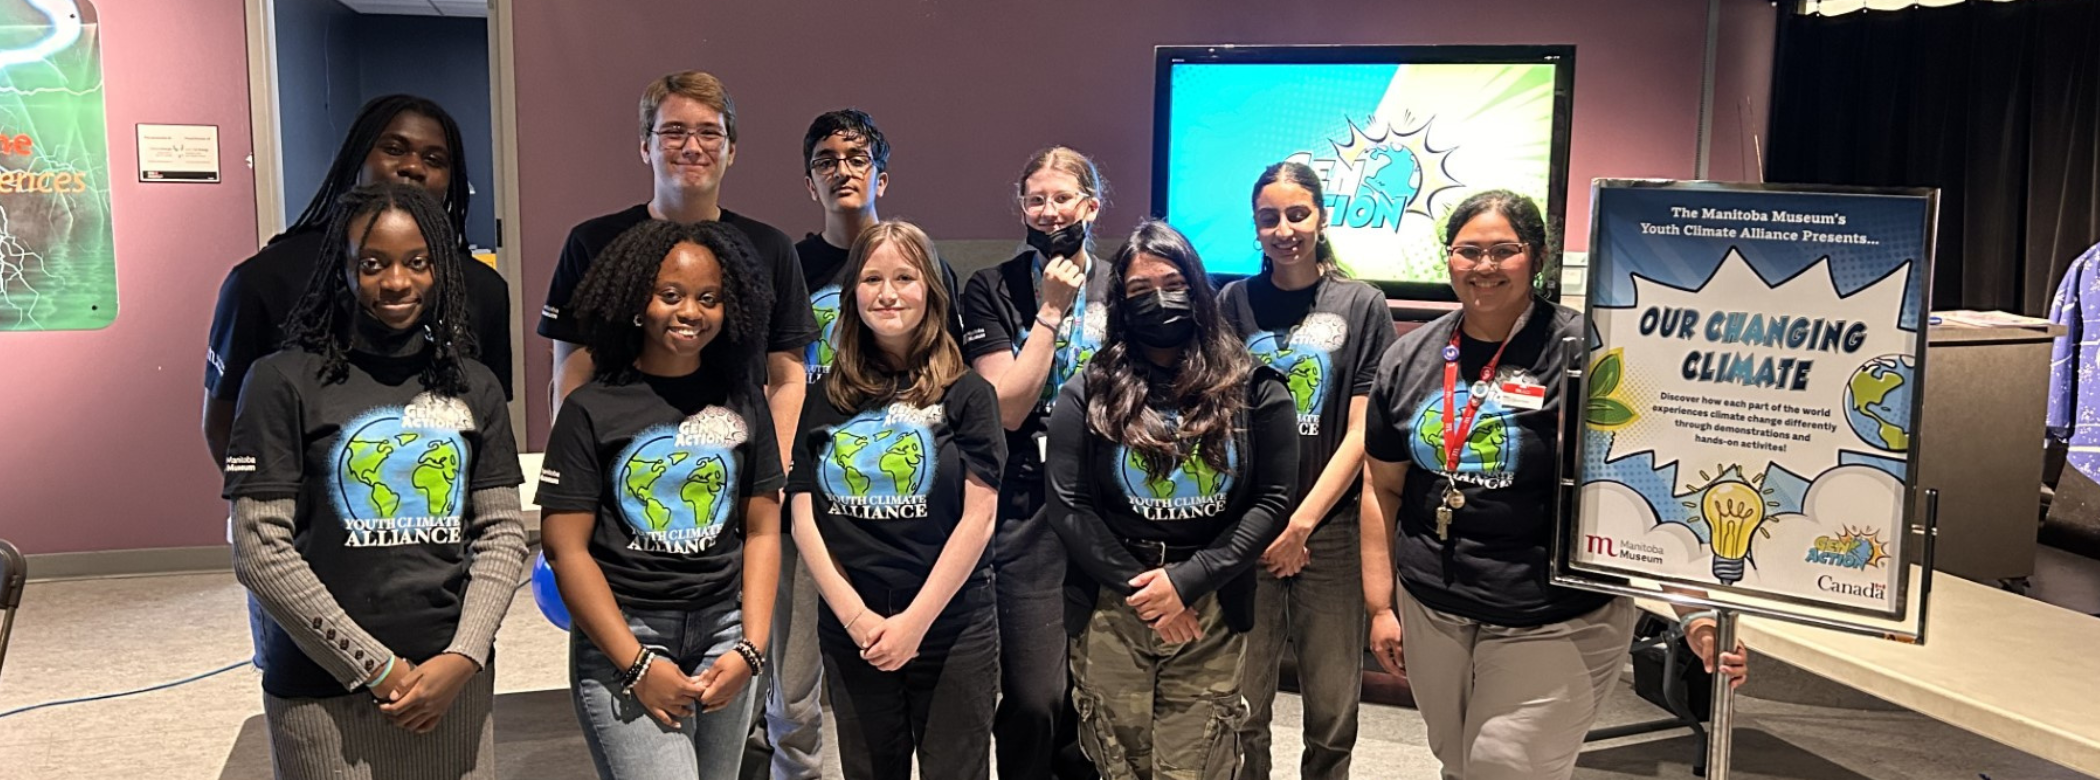 A group of nine youth and a Museum staff member smiling together. All are wearing matching t-shirts with an illustrated globe and the words “GenAction! / Youth Climate / Alliance”. On the right side of the group is a sign reading, “Our Changing Climate”.